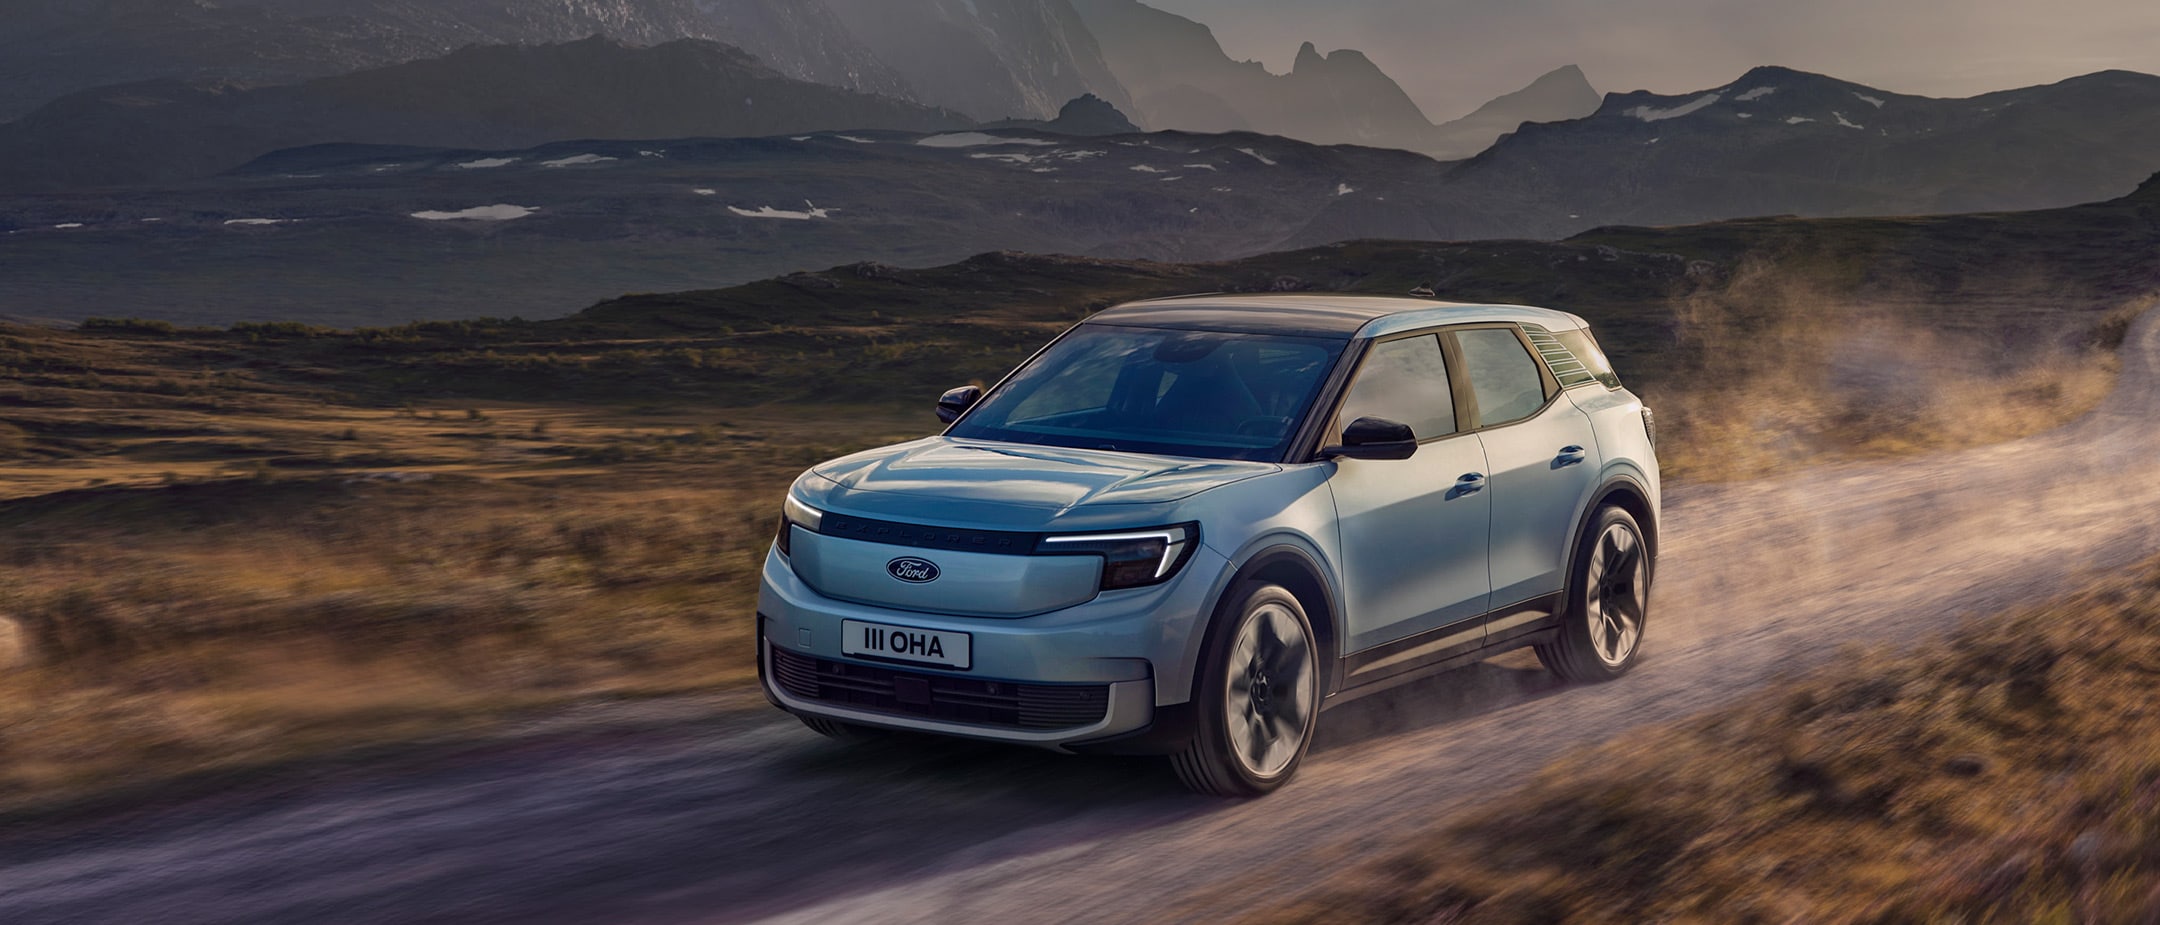 The New All-Electric Explorer being driven through wild landscape